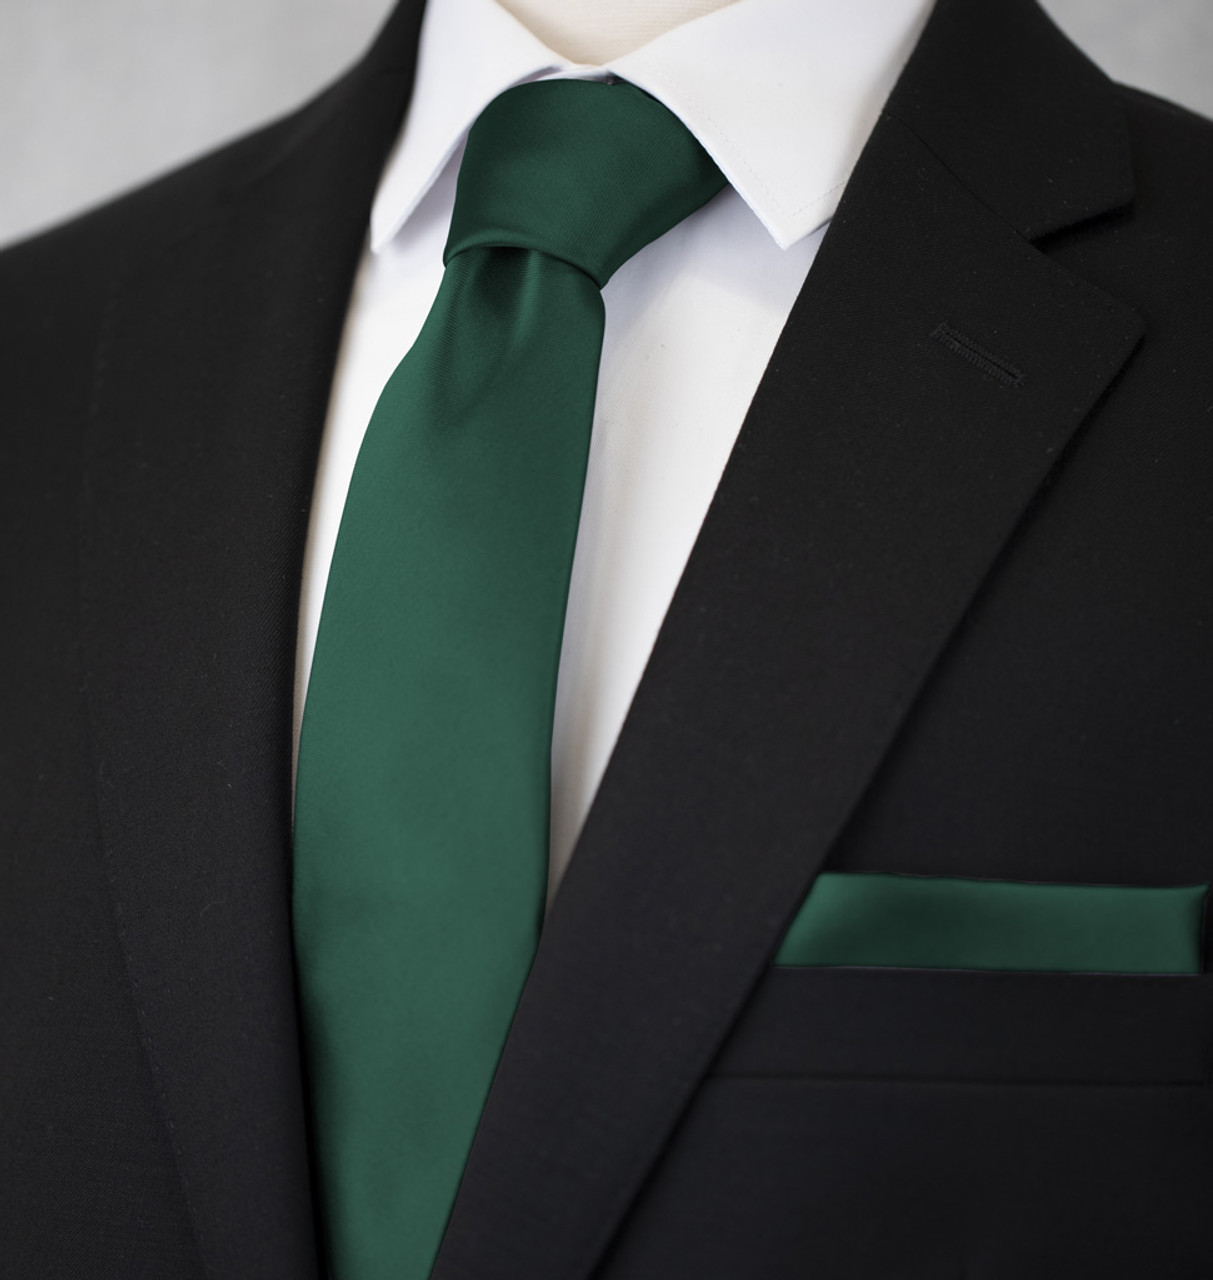 Men's Ties: Fabrics, Style and How to Tie a Tie Guide - Suits Expert